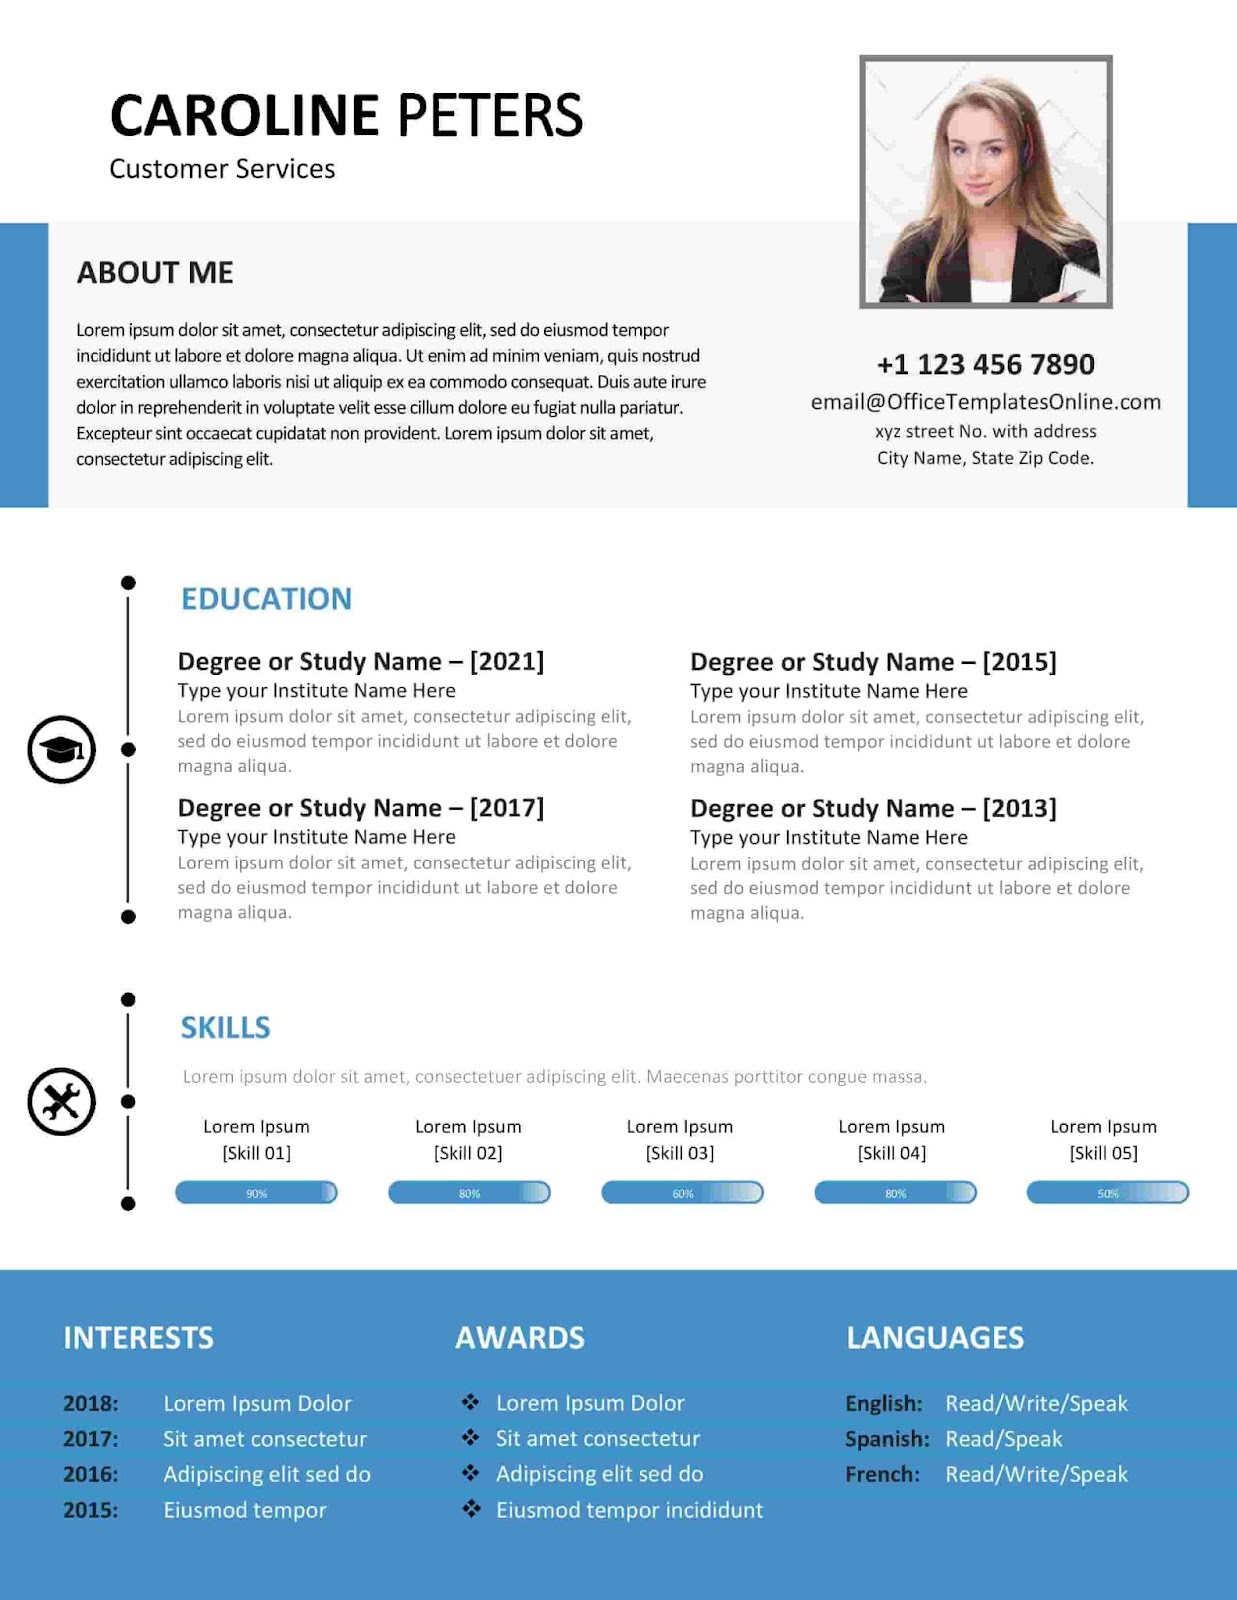 Resume samples 1 | Awign